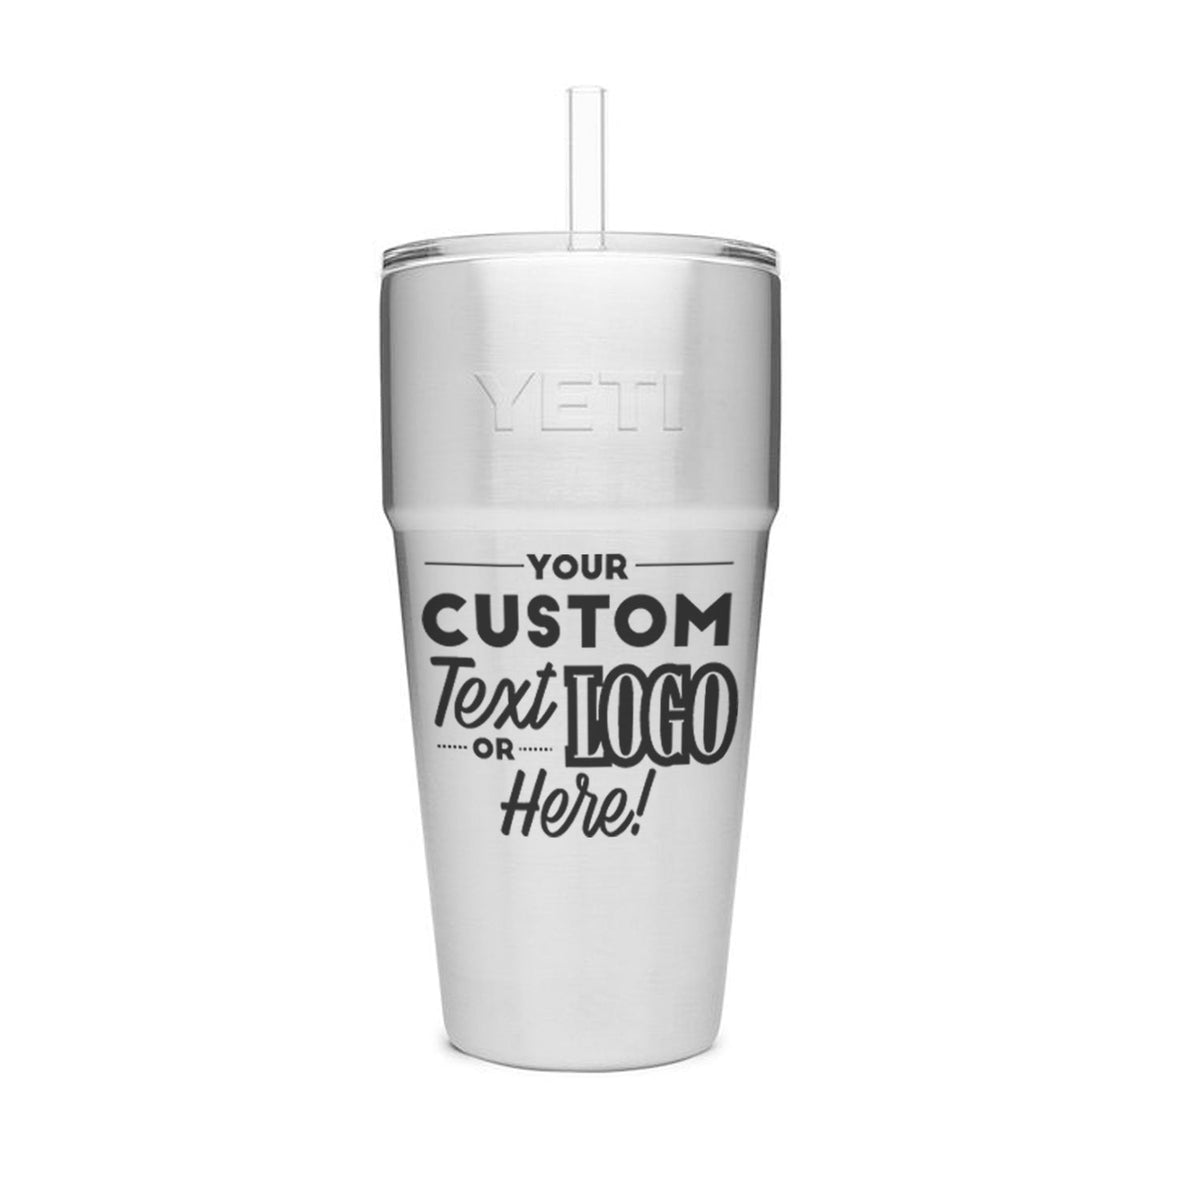 Yeti - 26 oz Rambler Stackable Cup with Straw Lid Black